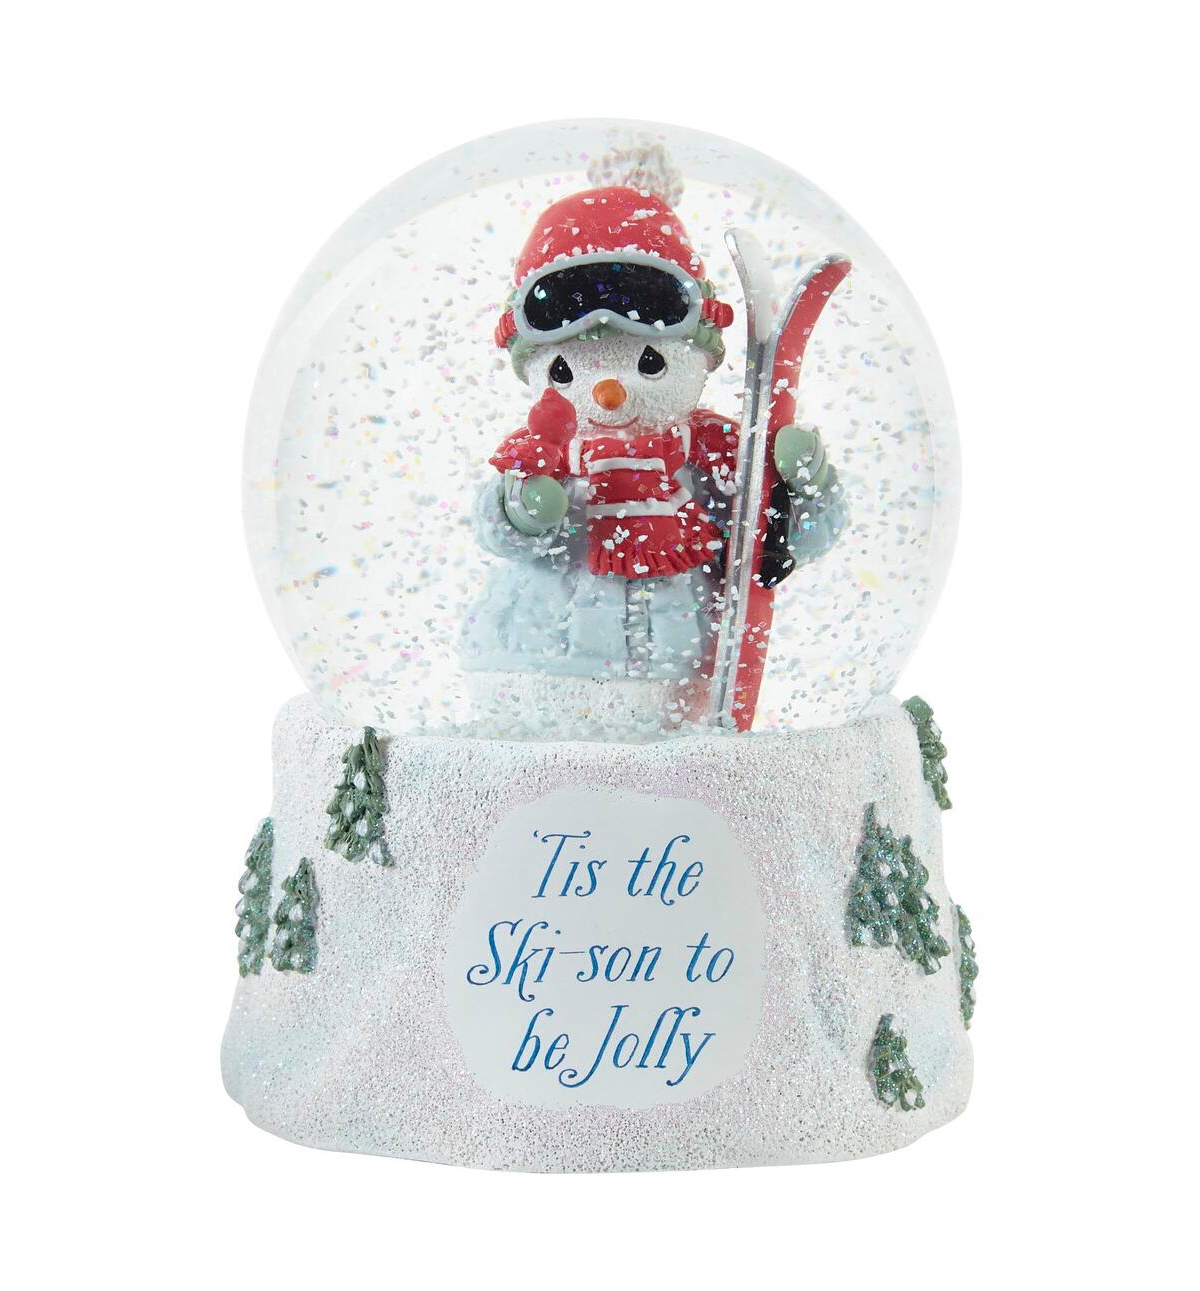 Tis The Ski-Son To Be Jolly Annual Snowman Resin, Glass Musical Snow Globe - Multicolored